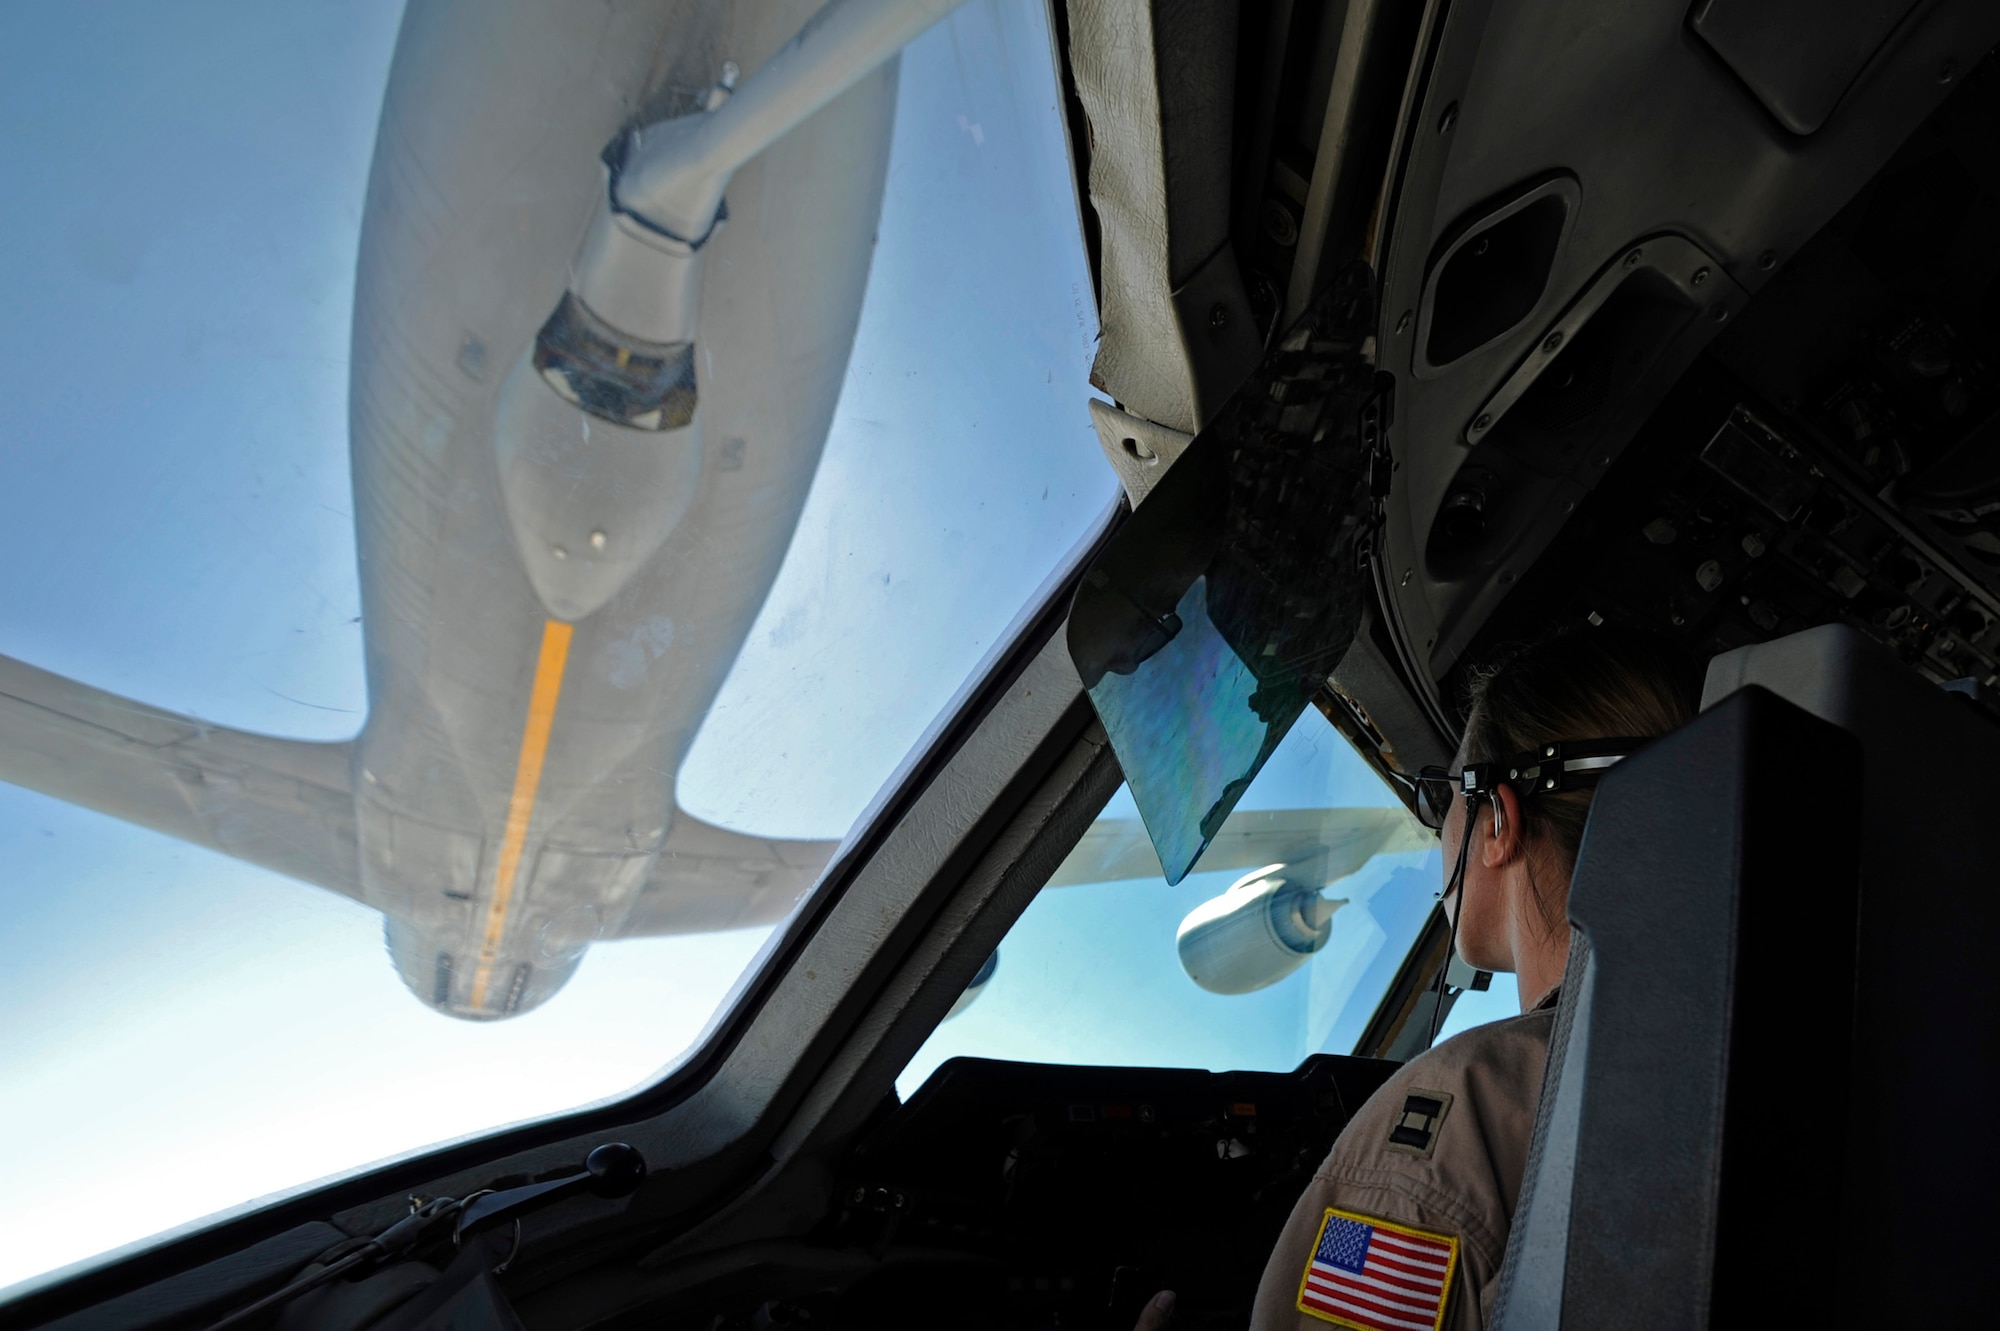 U.S. Air Force Capt. Kristin Sajevic pilots a KC-10 Extender aircraft, assigned to the 908th Expeditionary Air Refueling Squadron, while receiving fuel from an Air Force KC-135 Stratotanker June 14, 2009, over Afghanistan. (U.S. Air Force photo by Staff Sgt. Jason Robertson)